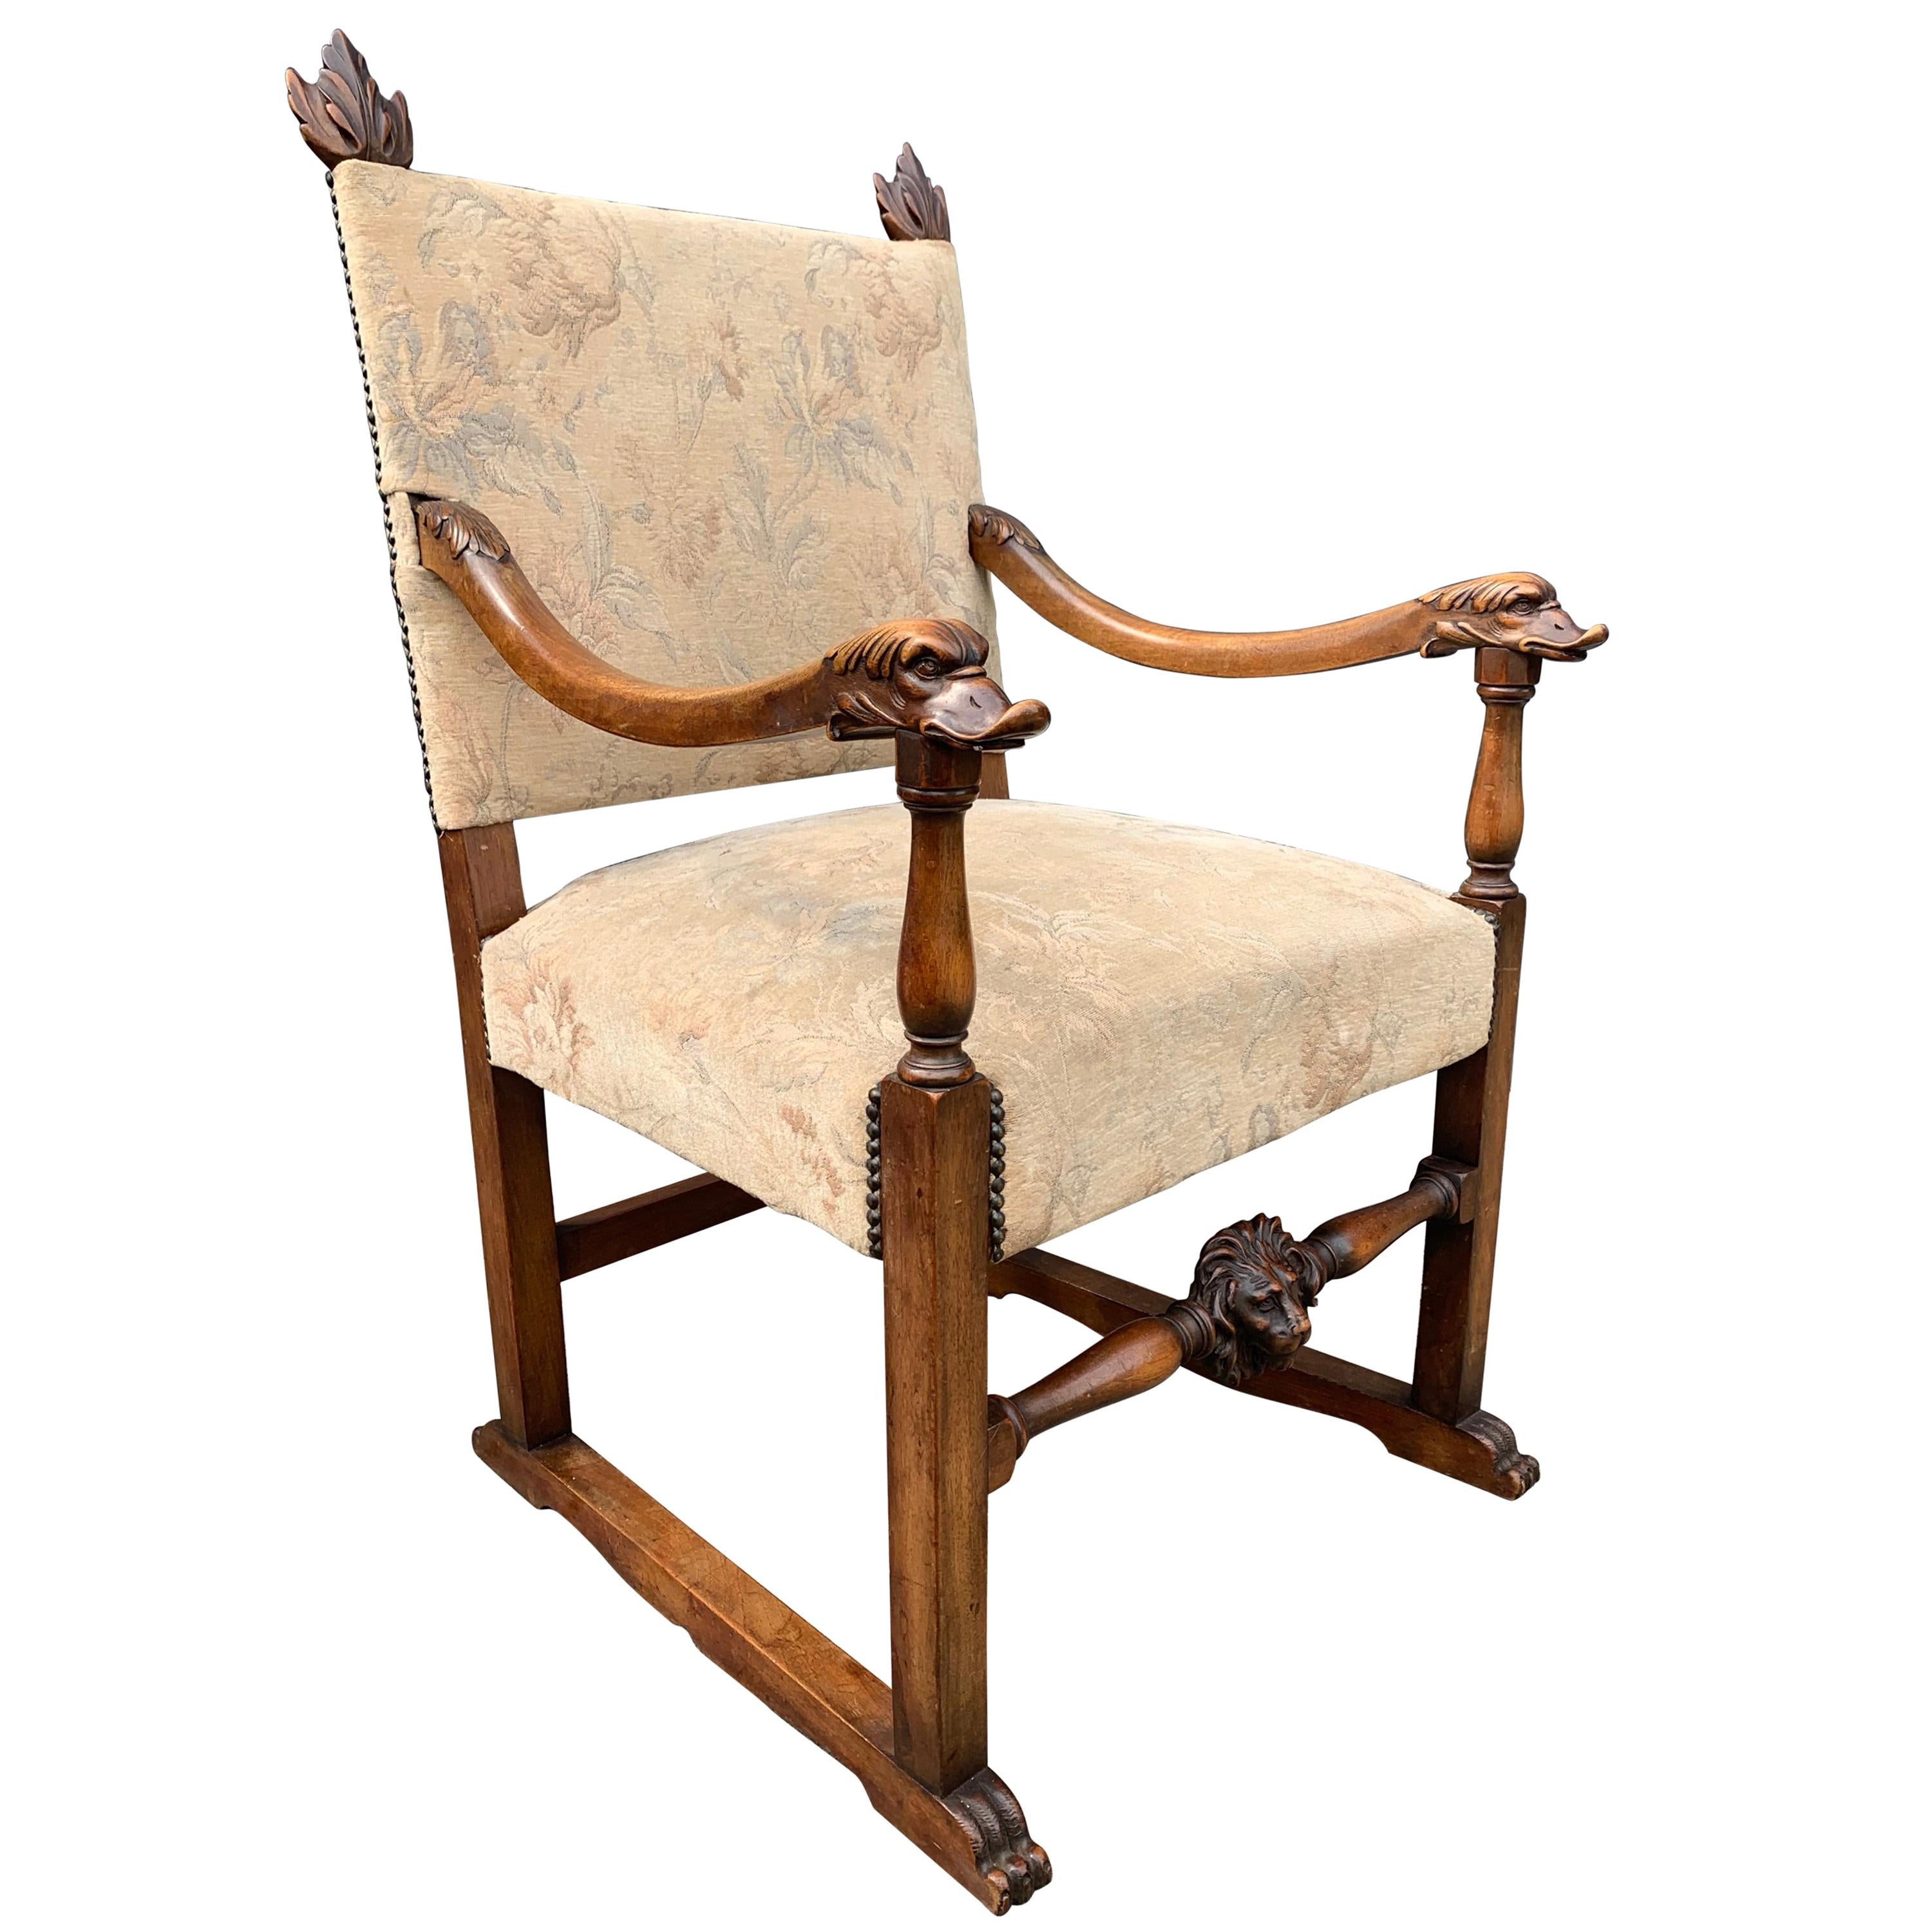 Walnut Armchair with Hand Carved Lion Head and Swan Sculptures as Armrests